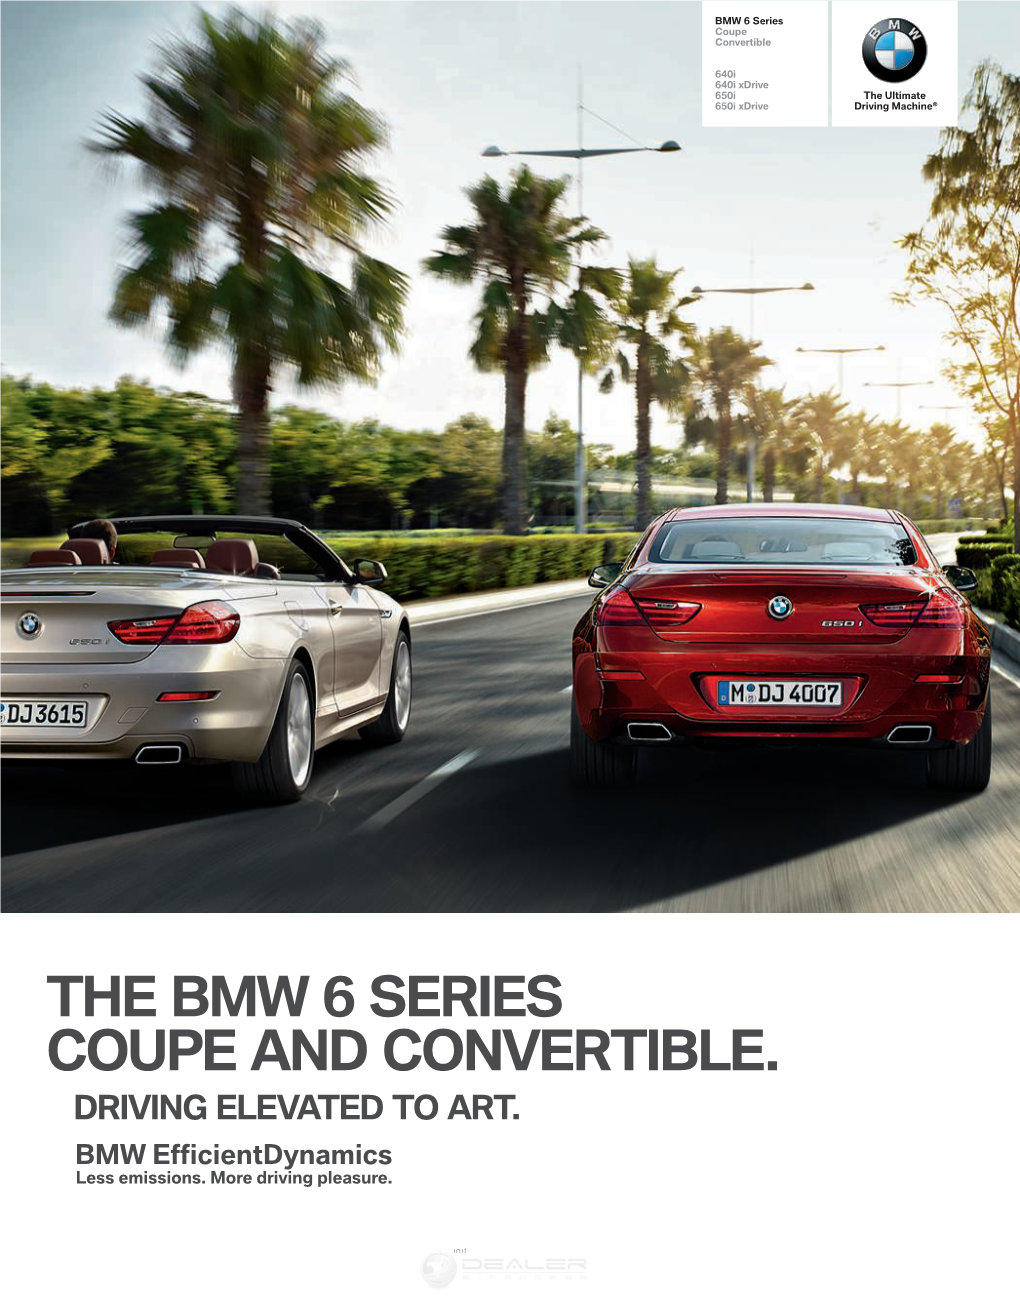 The Bmw Series Coupe and Convertible